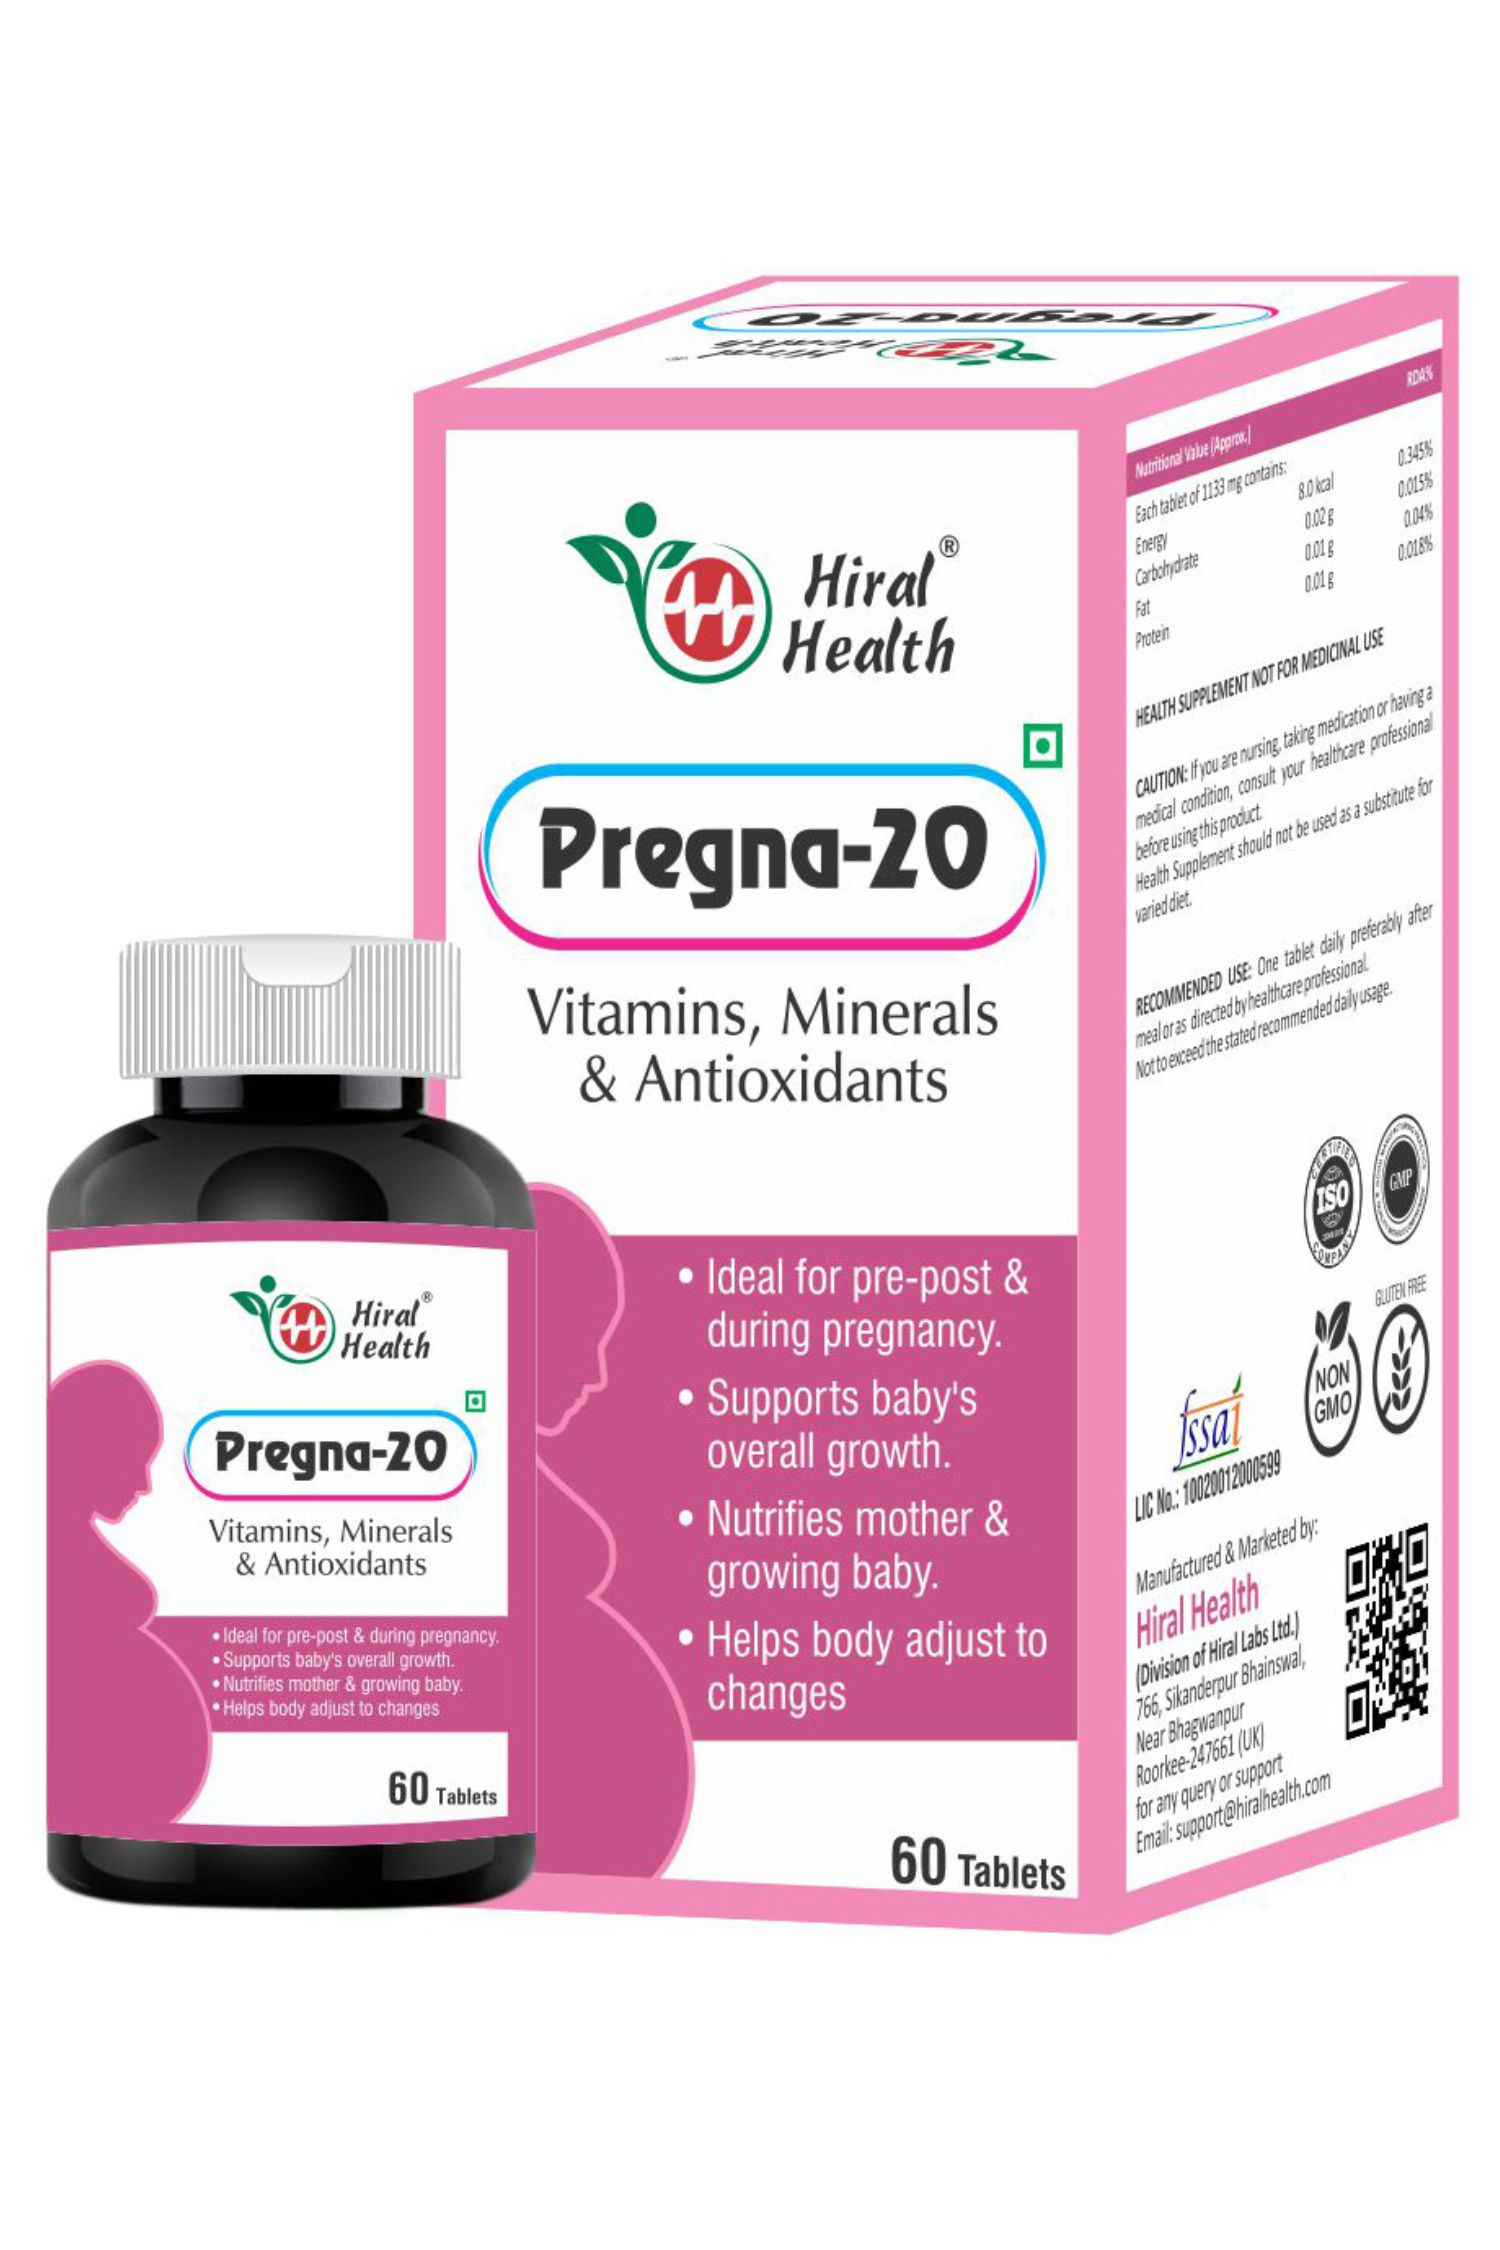 Pregna-20 tablet for women during pregnancy